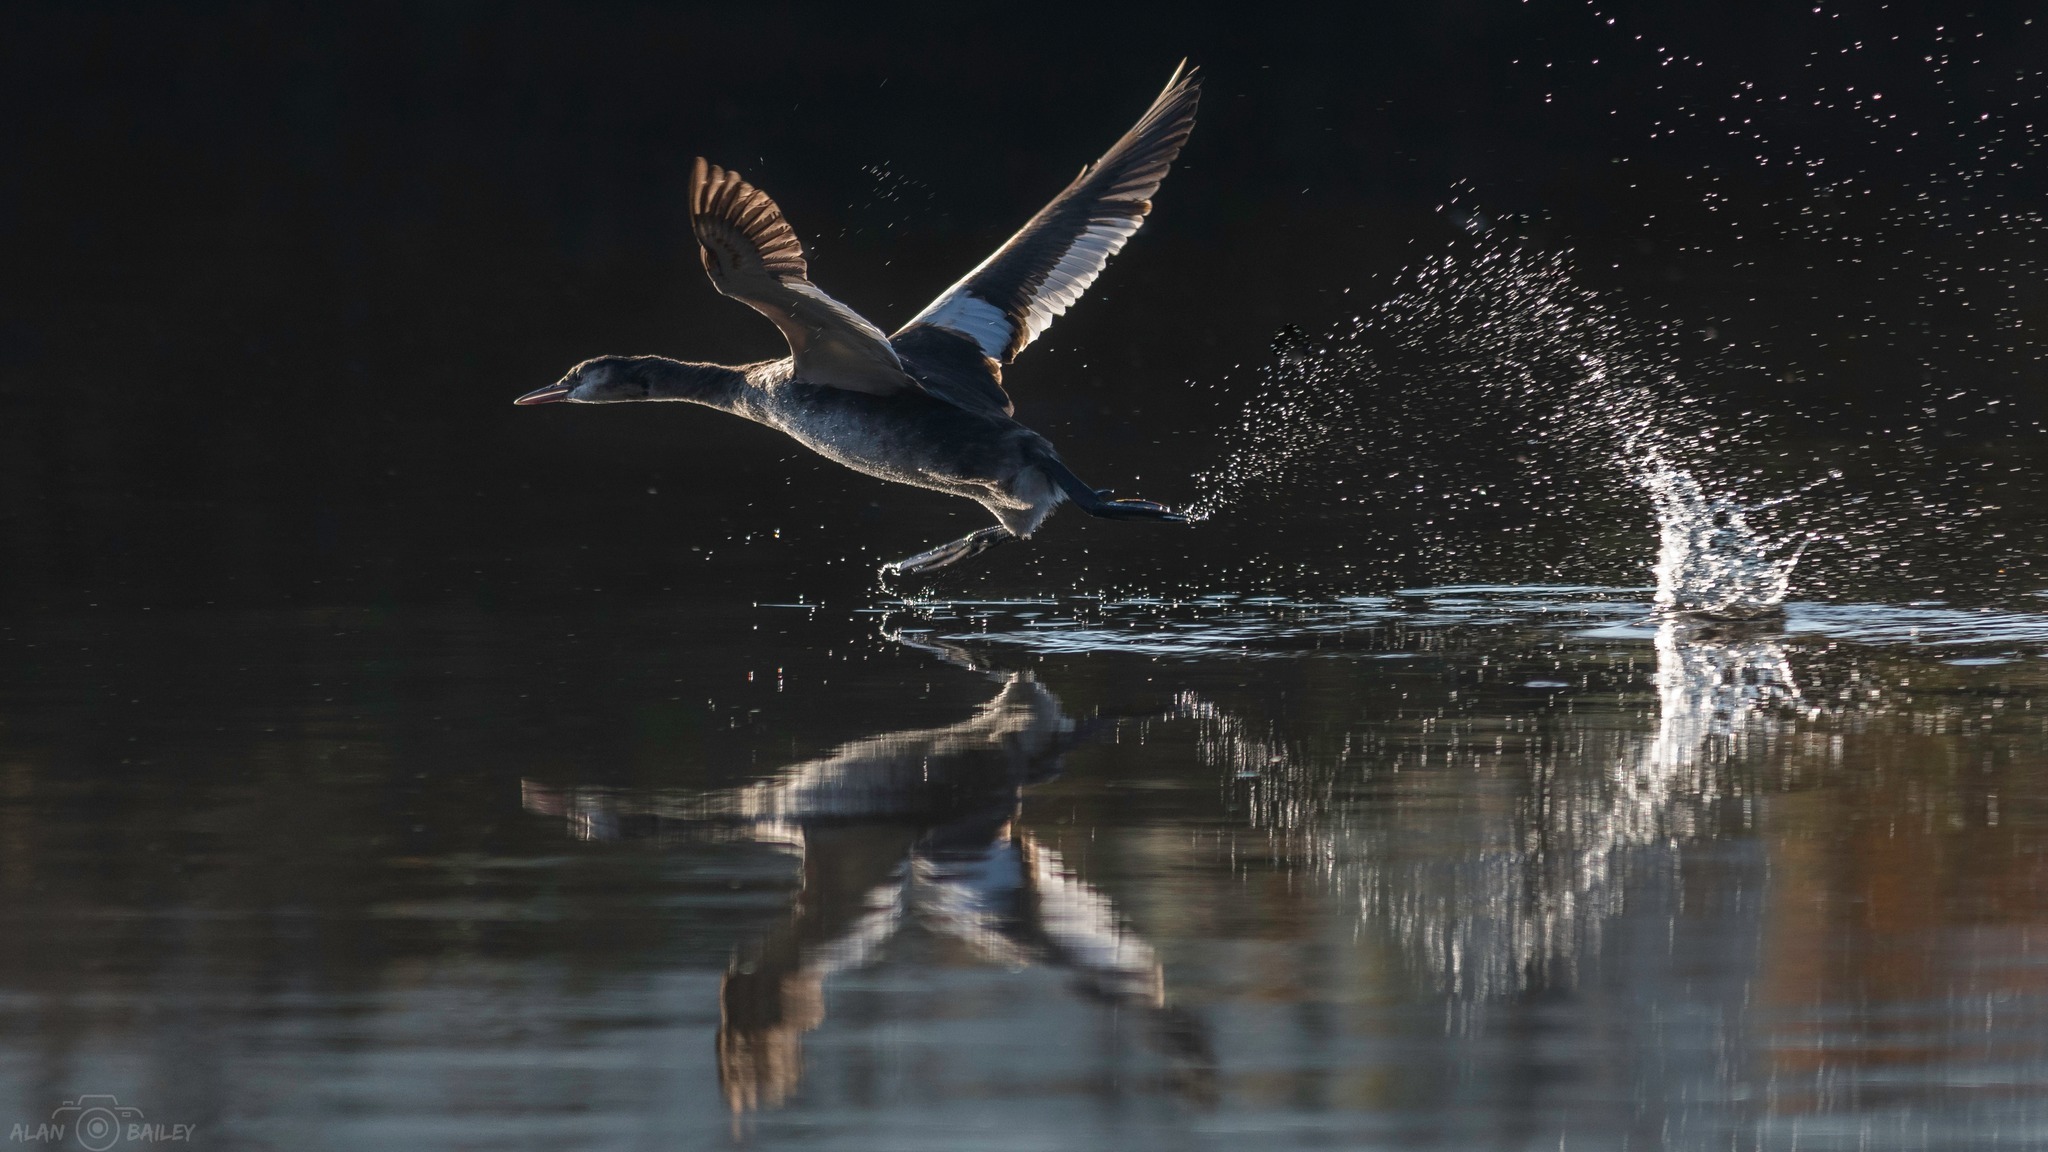 Takeoff on the River Weaver by Alan Bailey